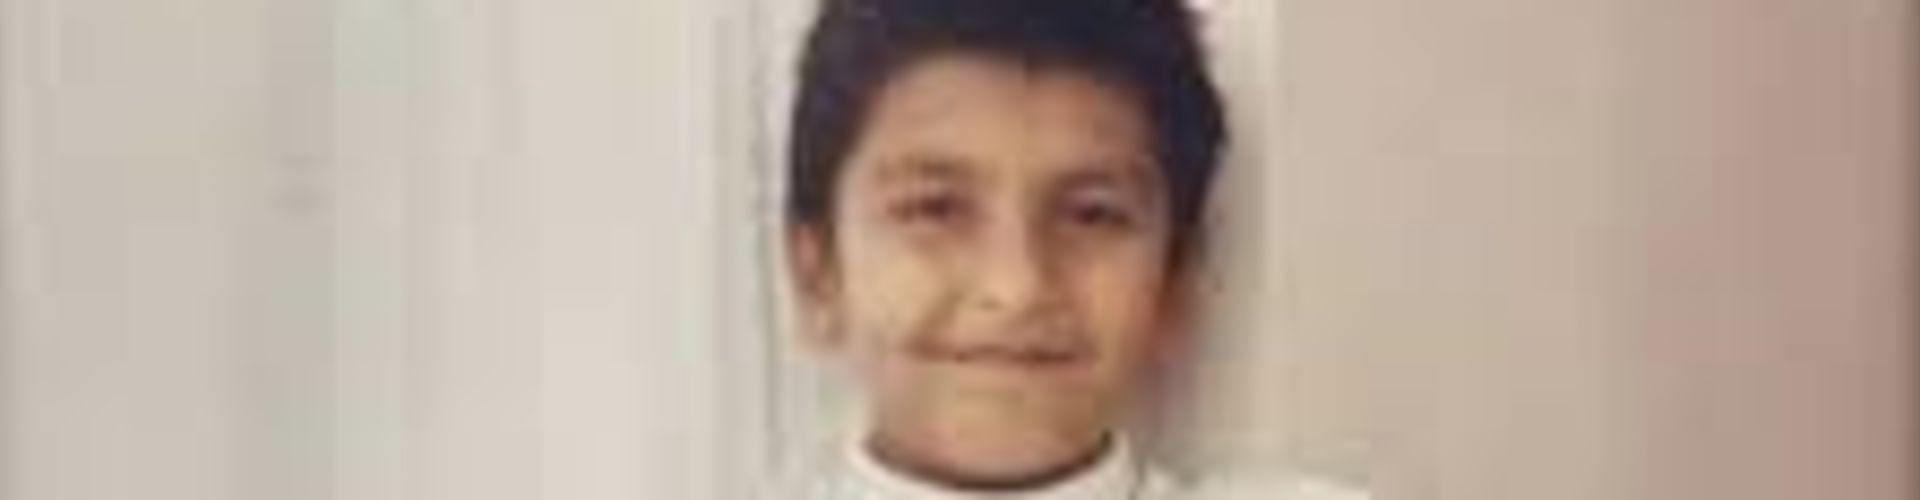 Ranveer Singh shares his childhood picture as a ‘stylish’ boy